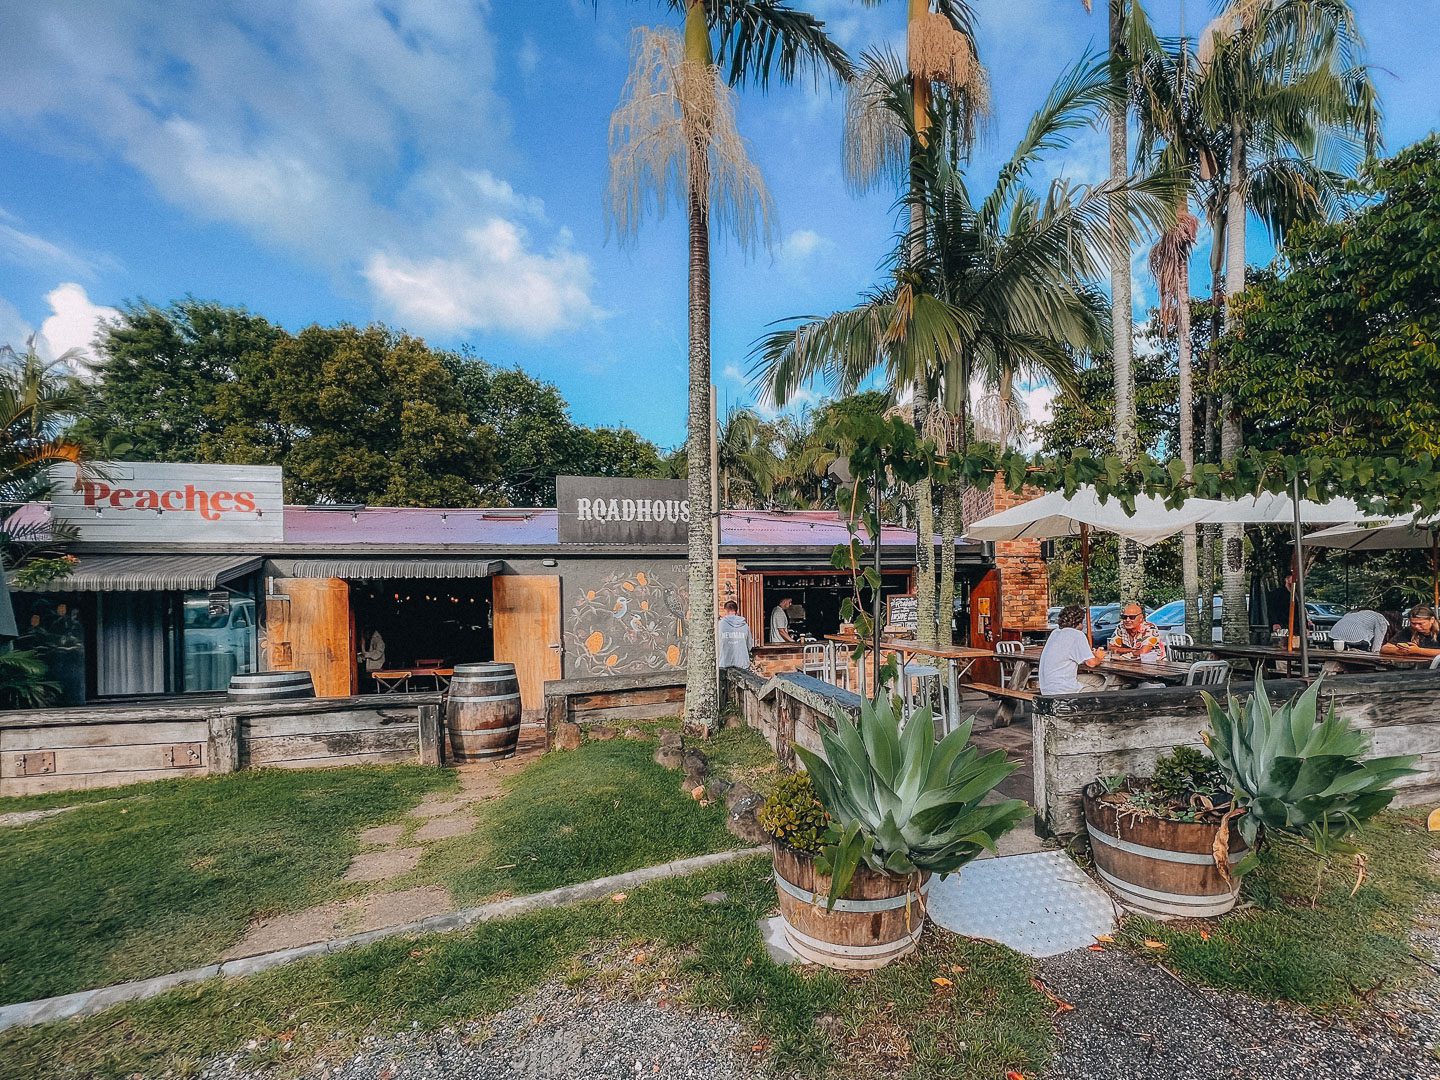 The exterior and entrance to Roadhouse cafe and restaurant in Byron Bay